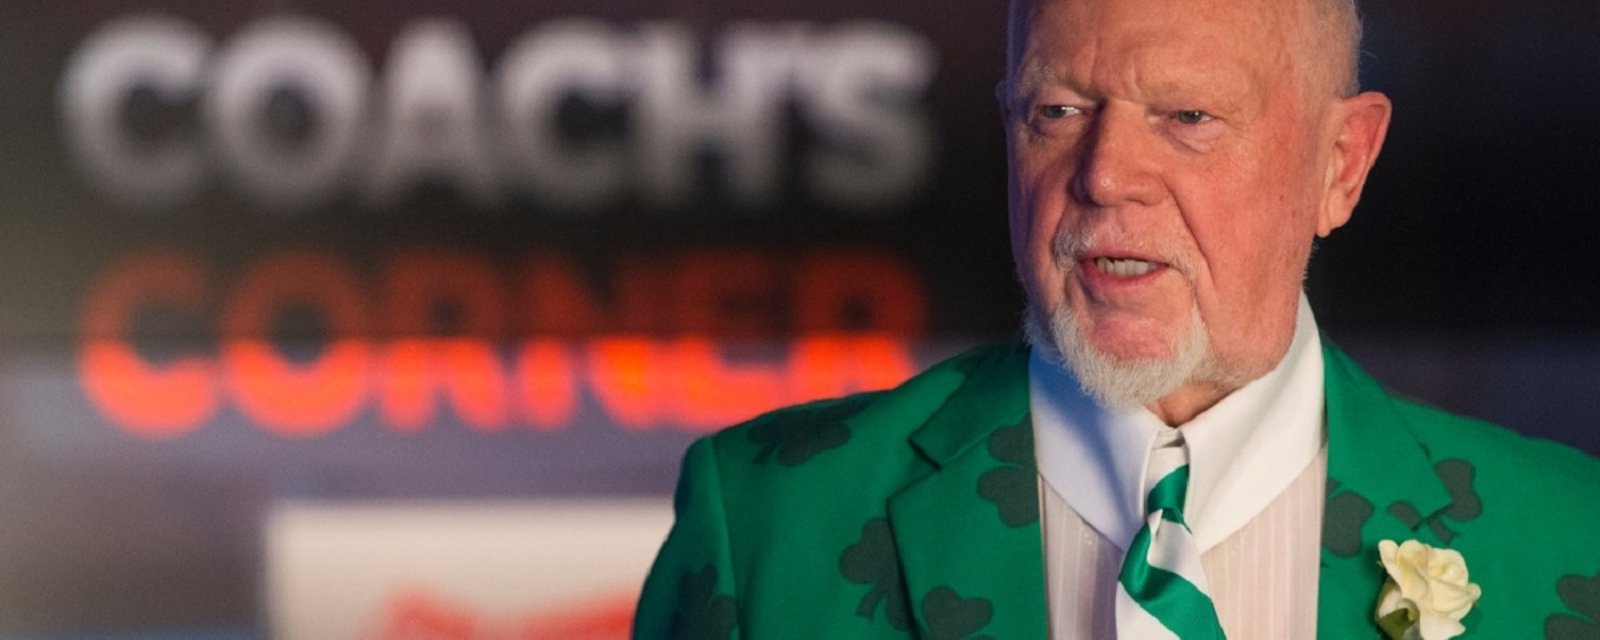 Don Cherry sounds off on McDavid and the Oilers coaching change.